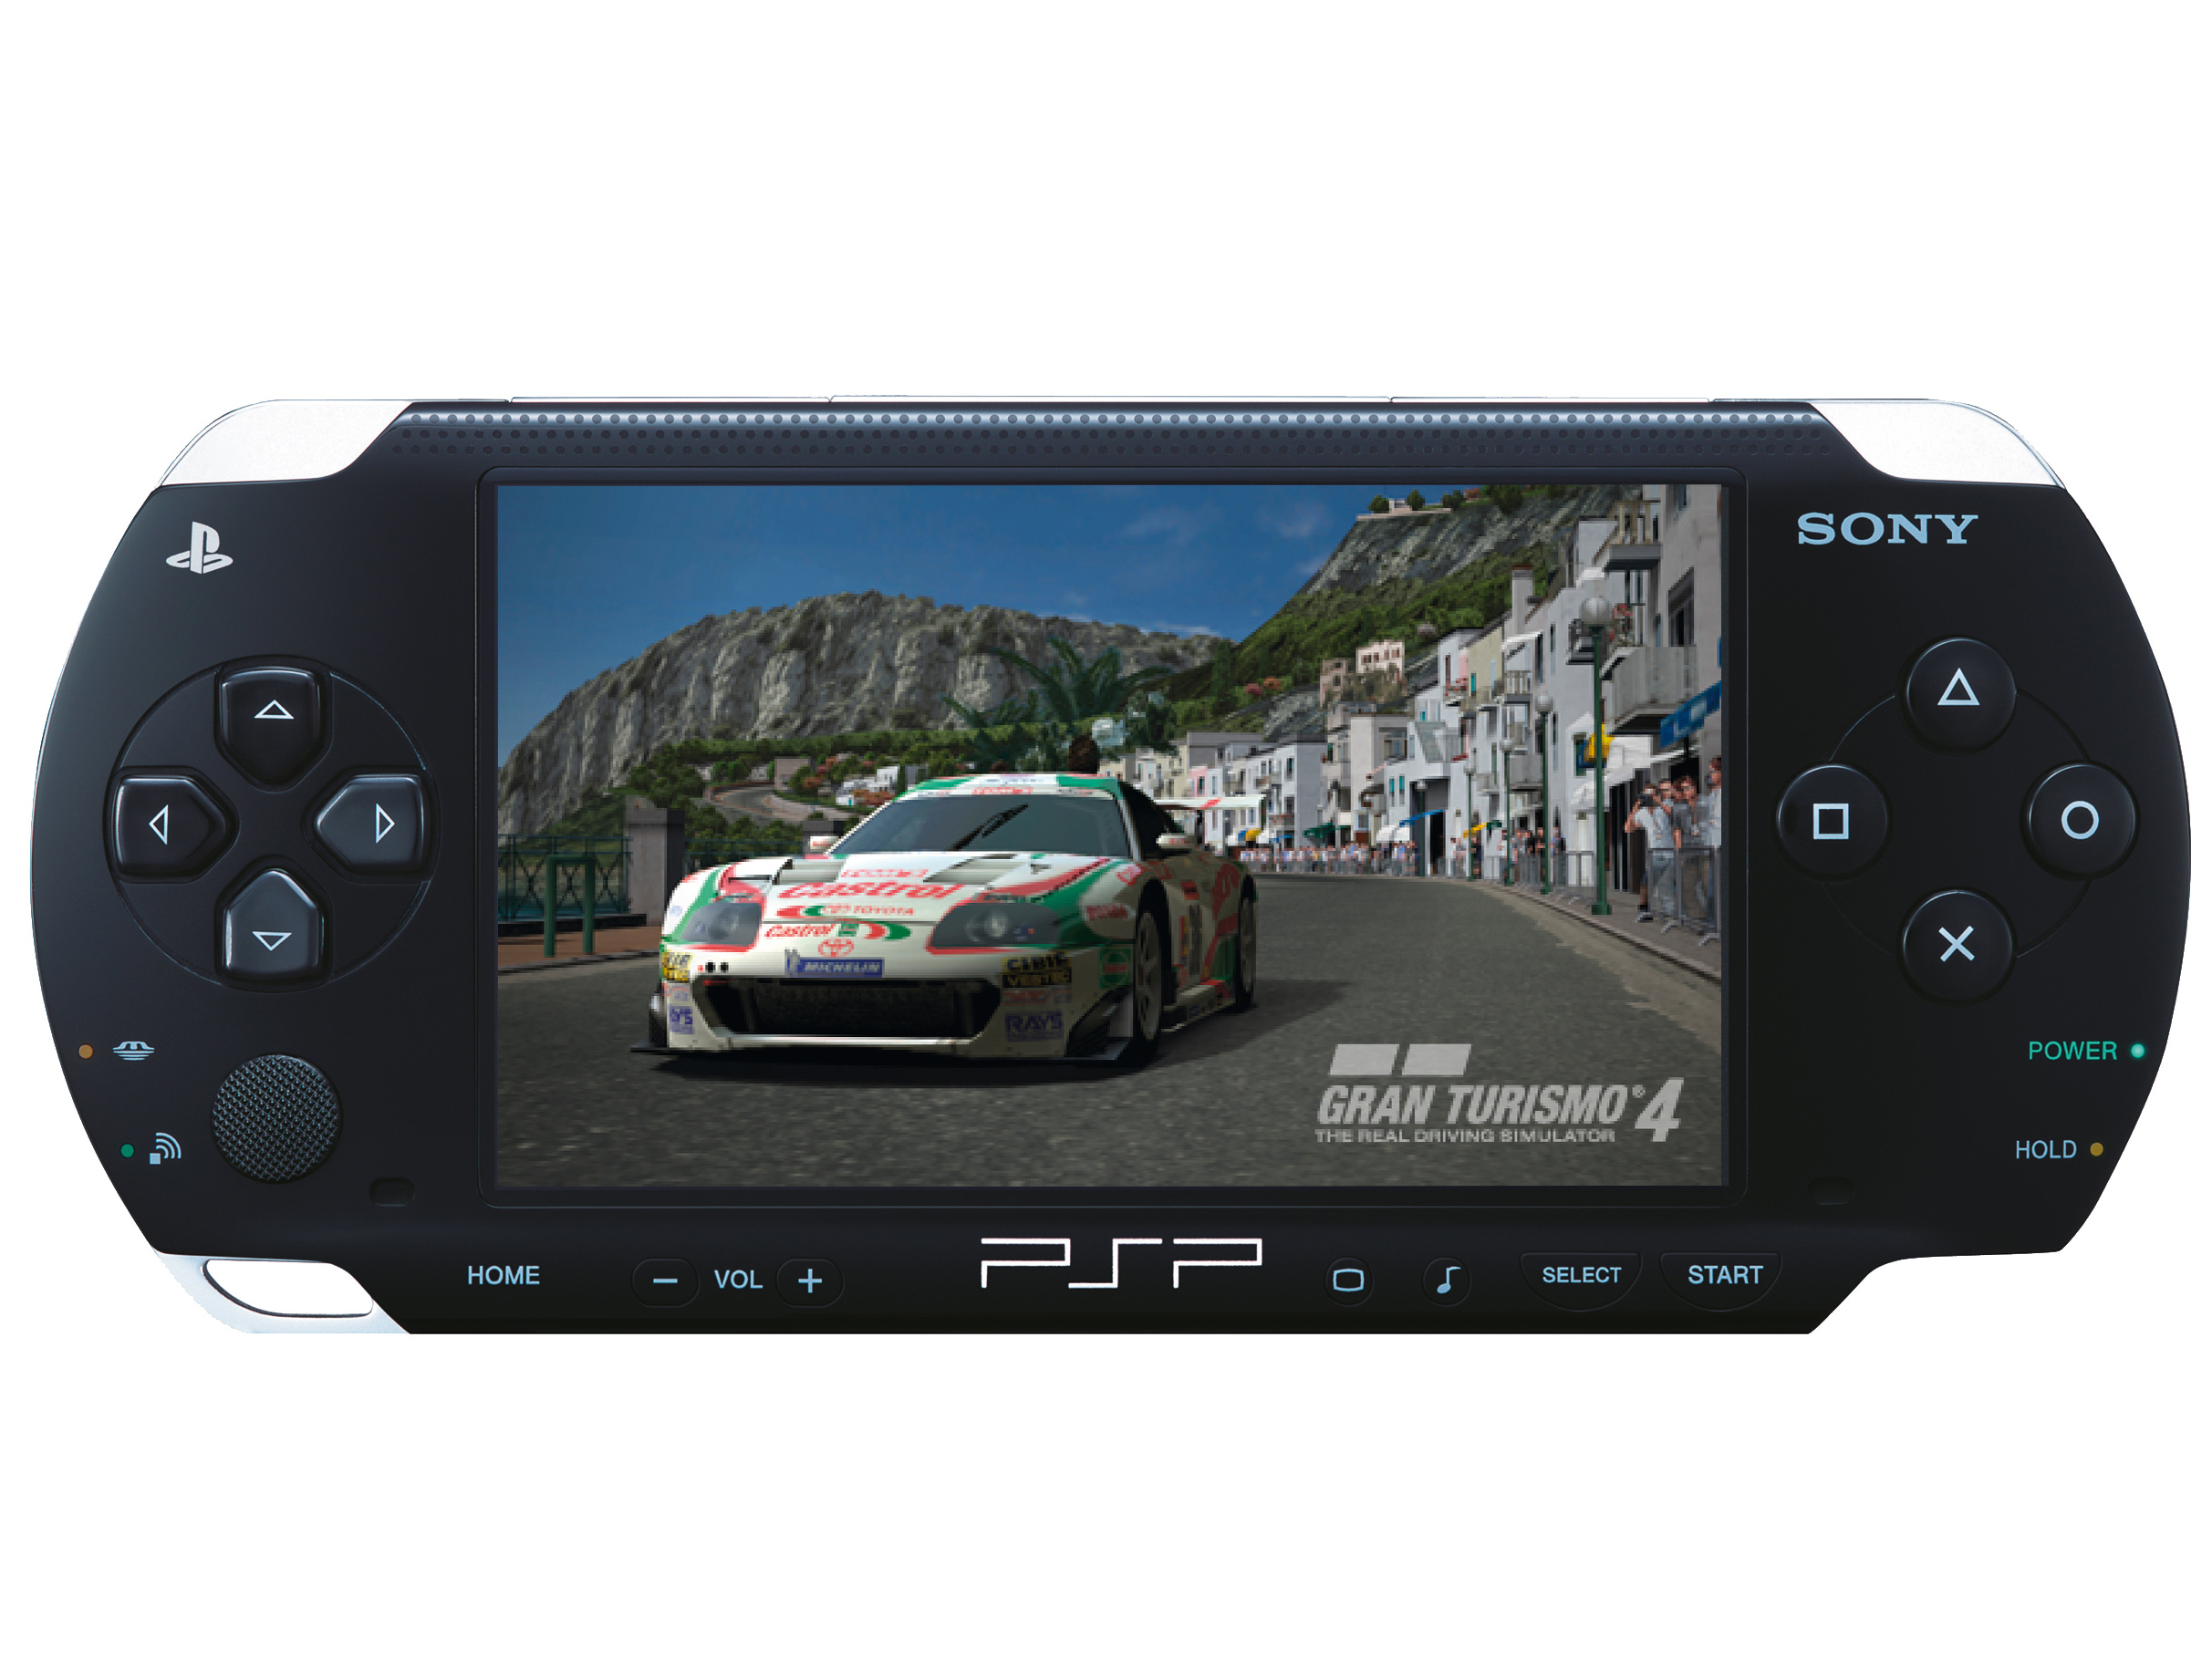 Sony’s Psp: All In The Name Of Serious Fun